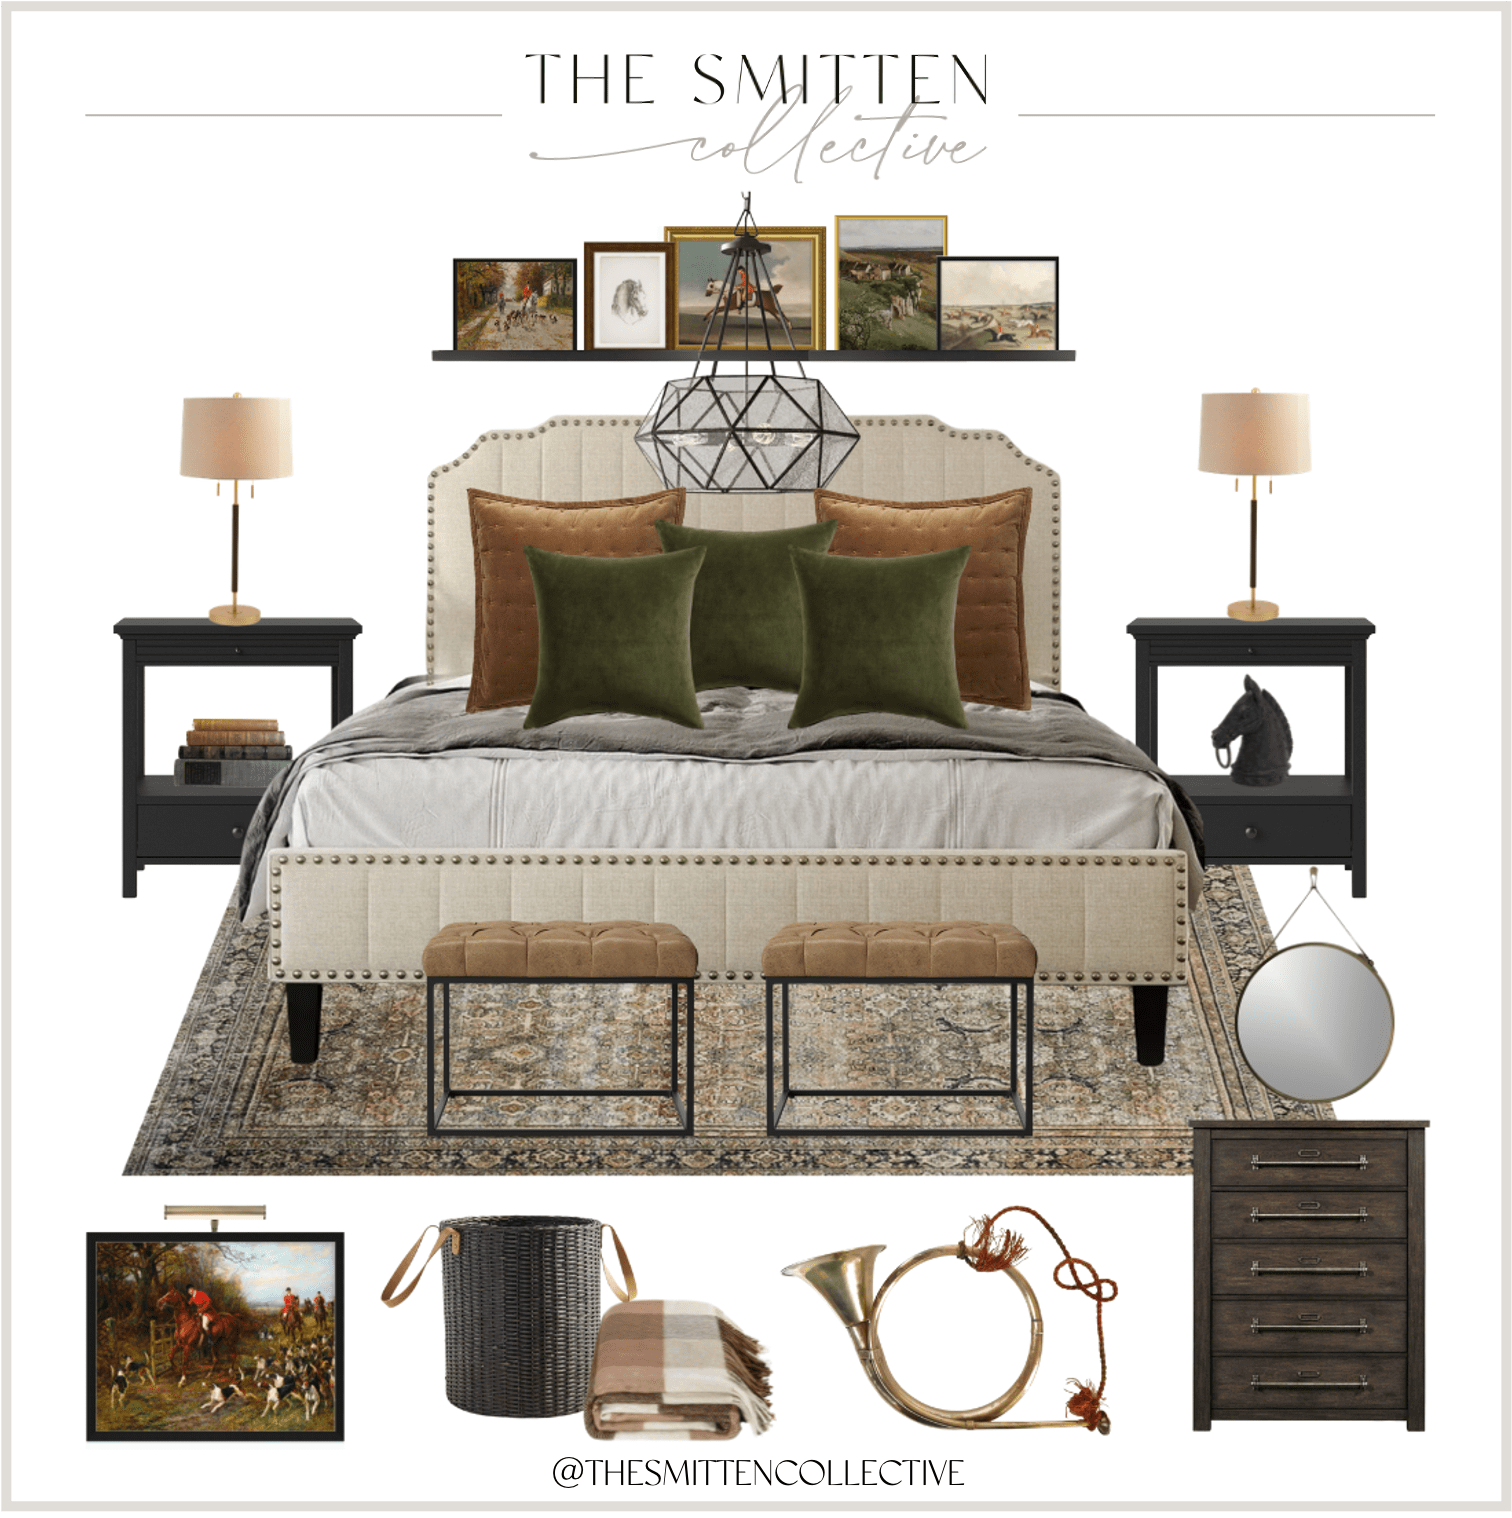 A bedroom design board featuring furniture and accessories in an equestrian theme